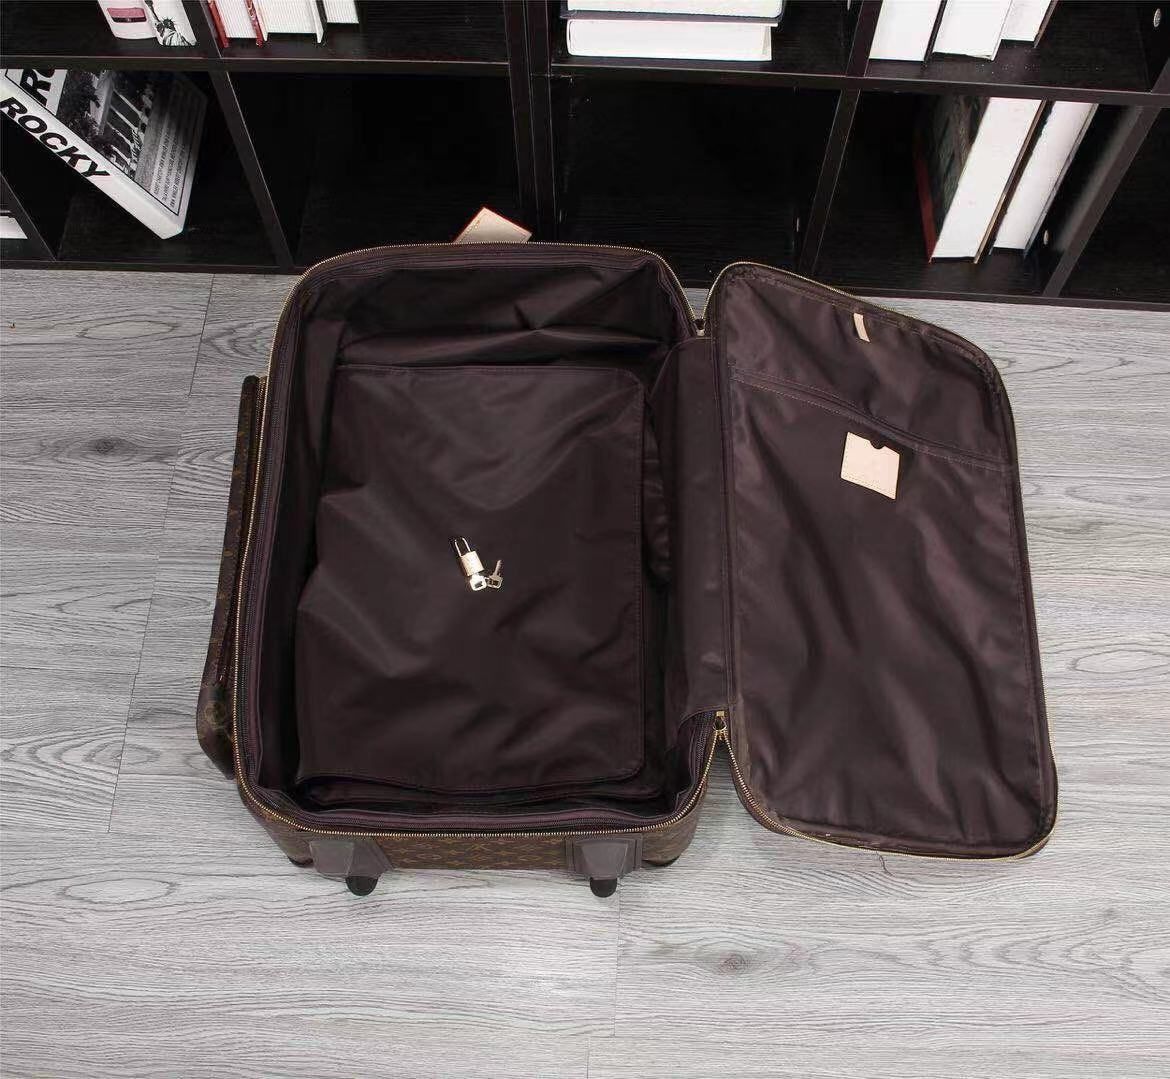 Louis Vuitton Suitcase Trolley Luggages Rolling Luggage Trunk Bag Well  Known Top Luxury Brand Suitcases Unisex Original Quality Spinner Wheel  Duffel Cases From Kcxeshose, $676.55